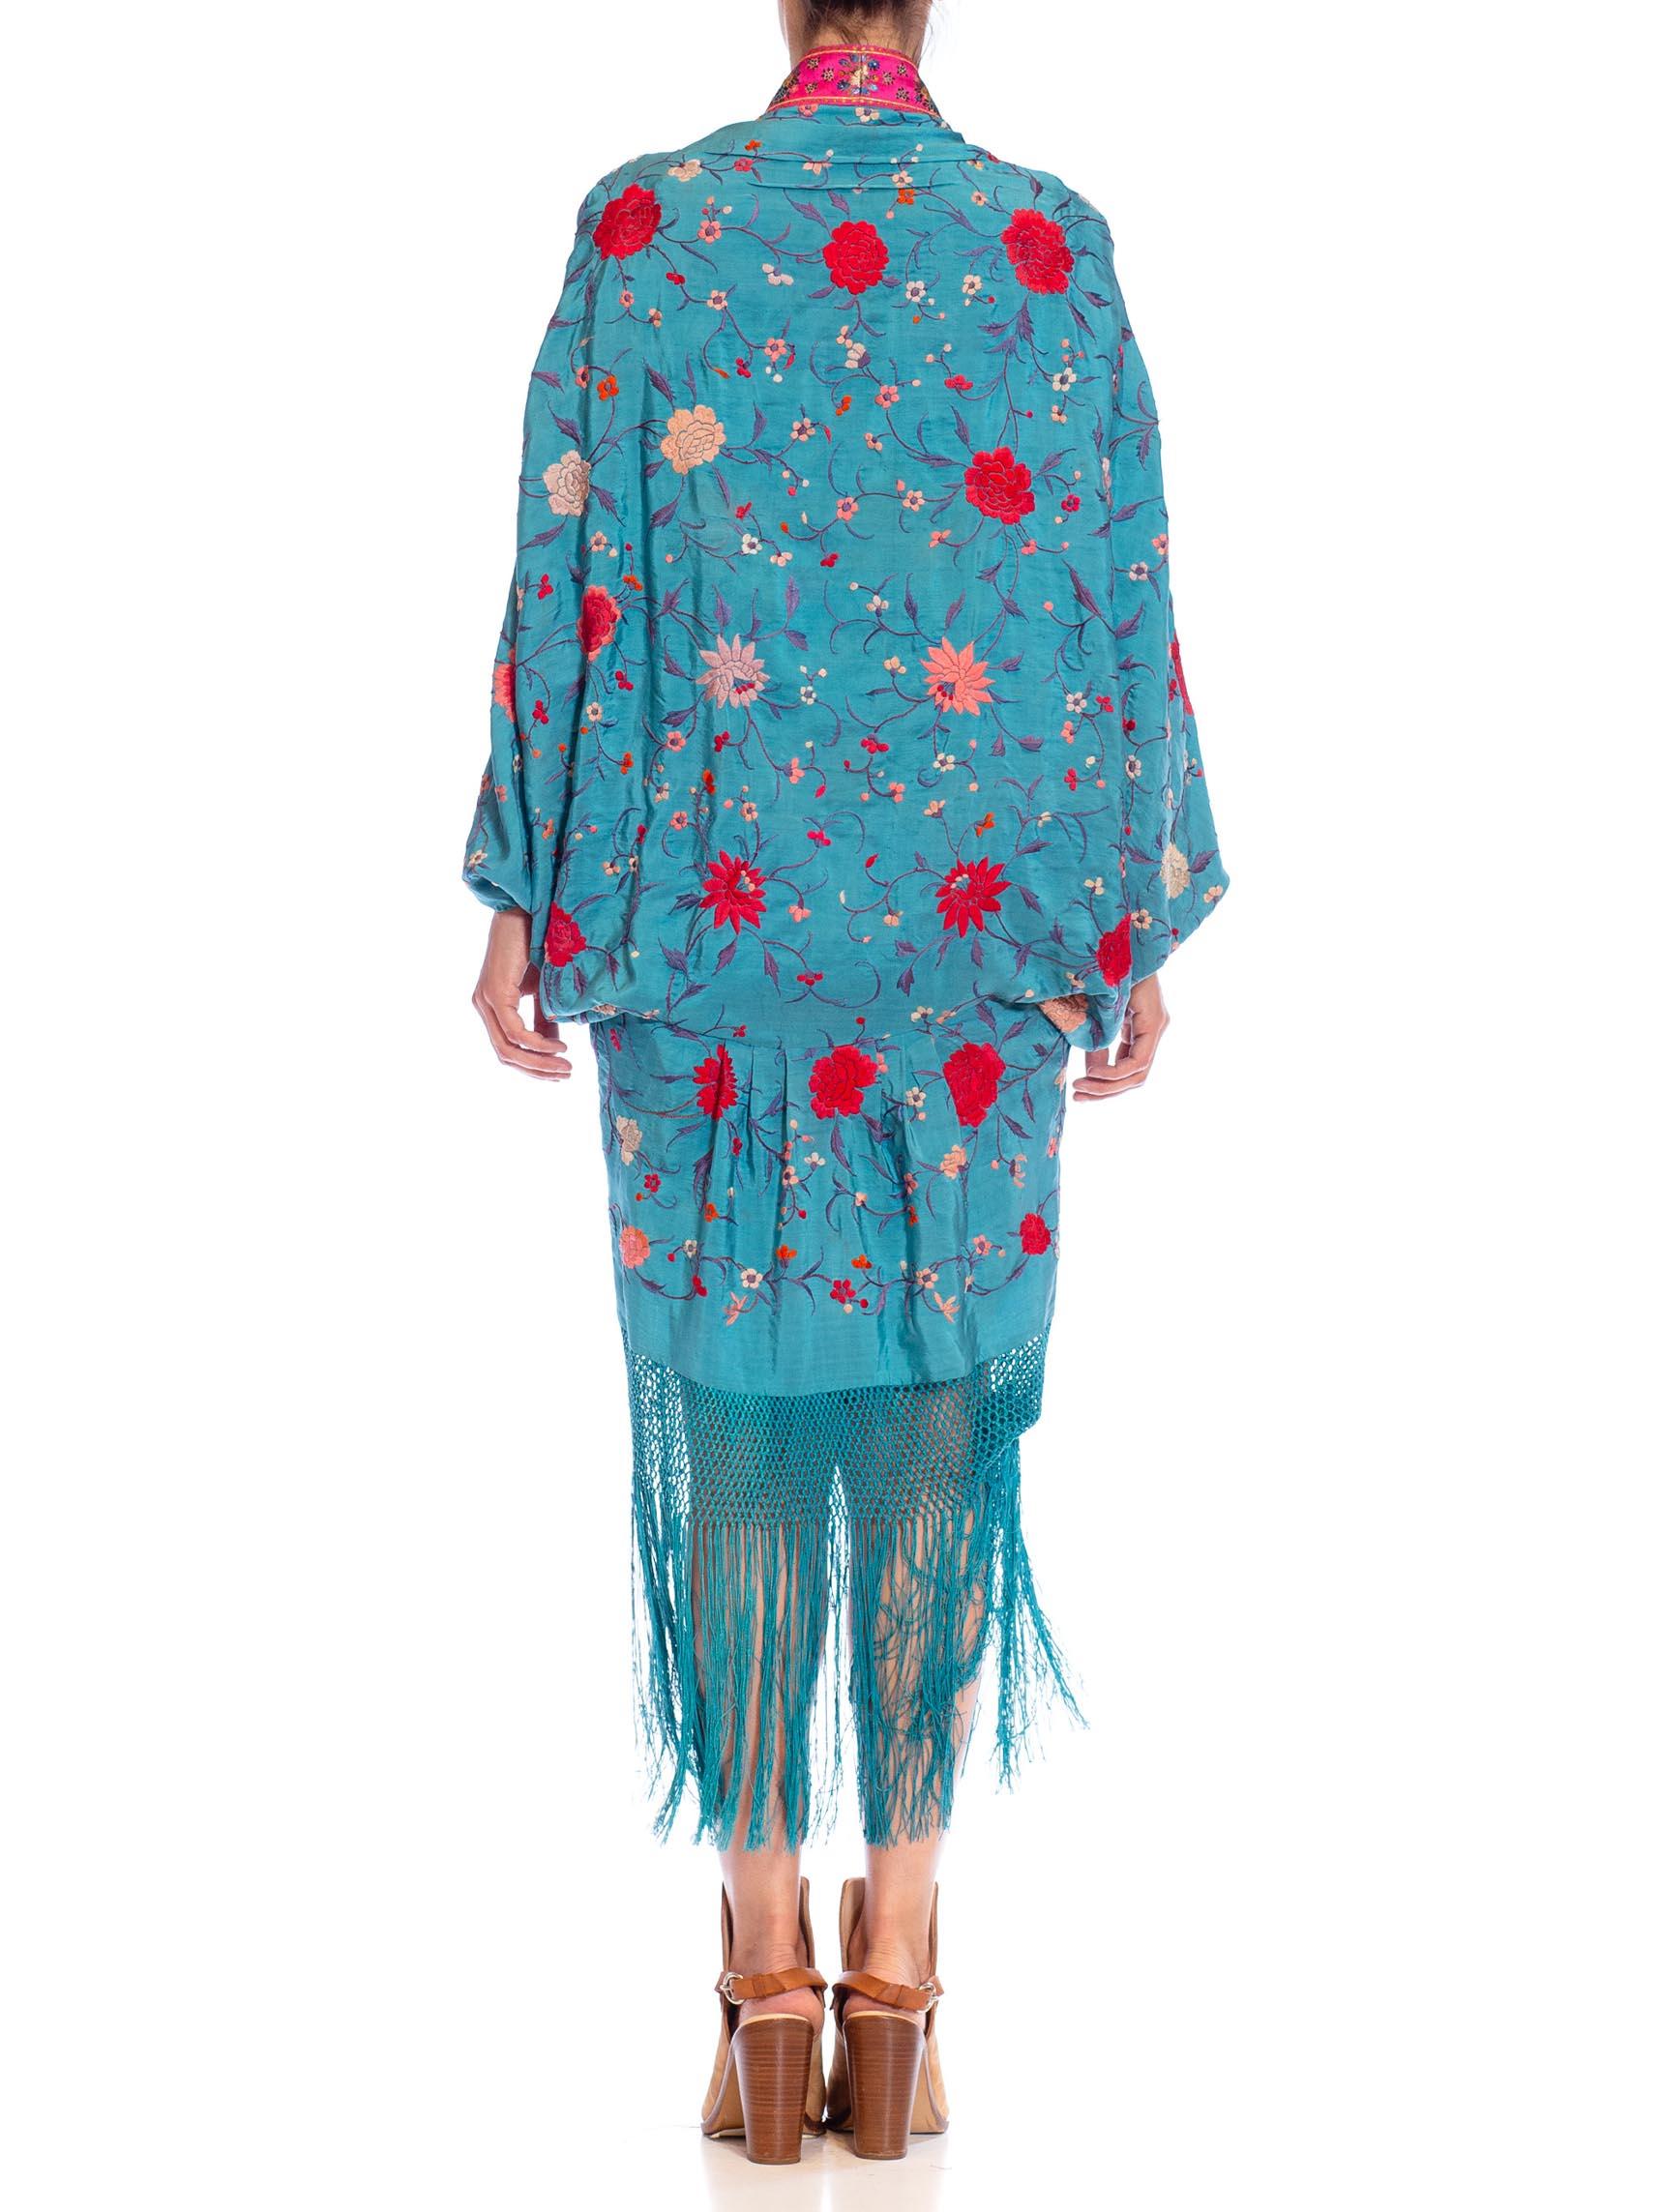 MORPHEW COLLECTION Aqua Blue & Pink Silk Embroidered Floral Cocoon With Fringe  For Sale 2